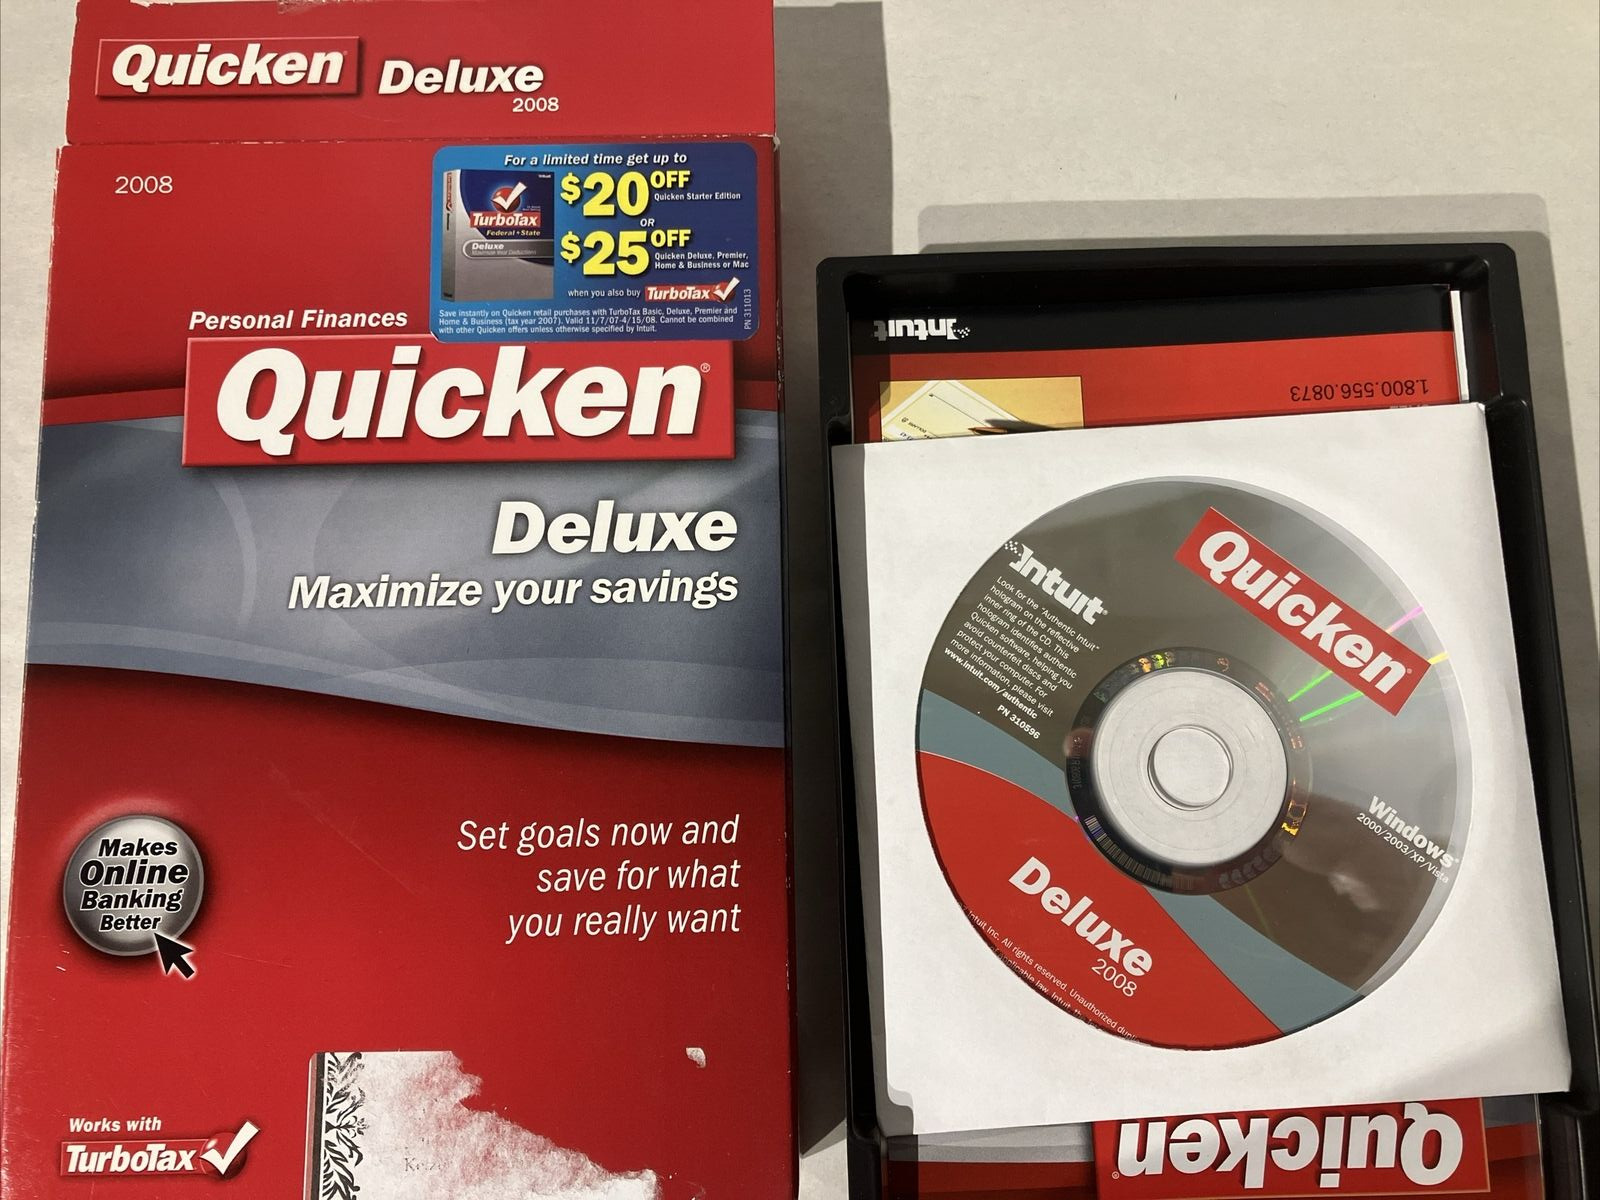 QUICKEN DELUXE 2008 PERSONAL FINANCE Software CD-ROM for Windows XP / Vista